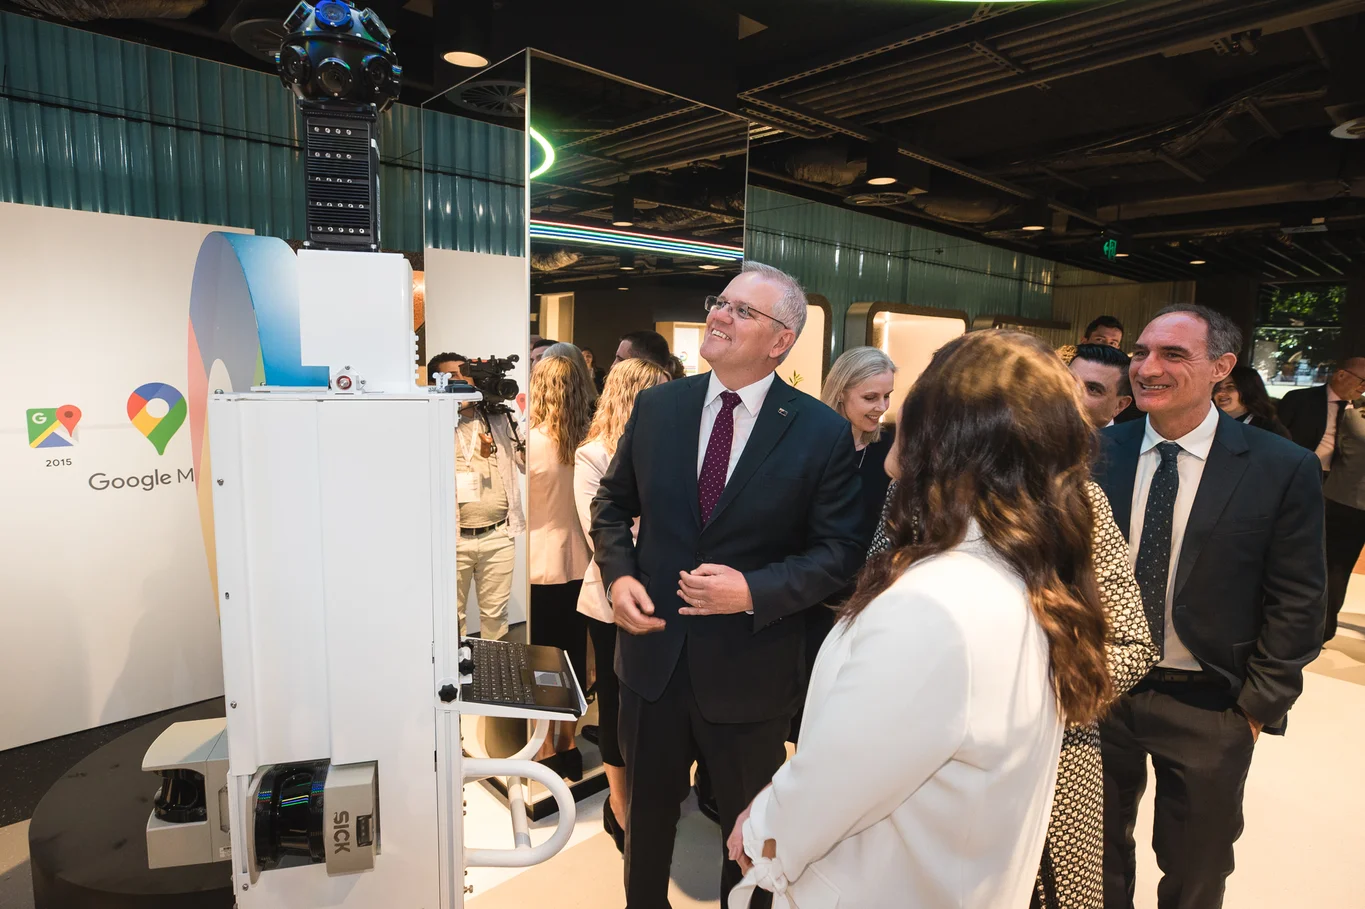 Prime Minister Scott Morrison reviewing Street View technology